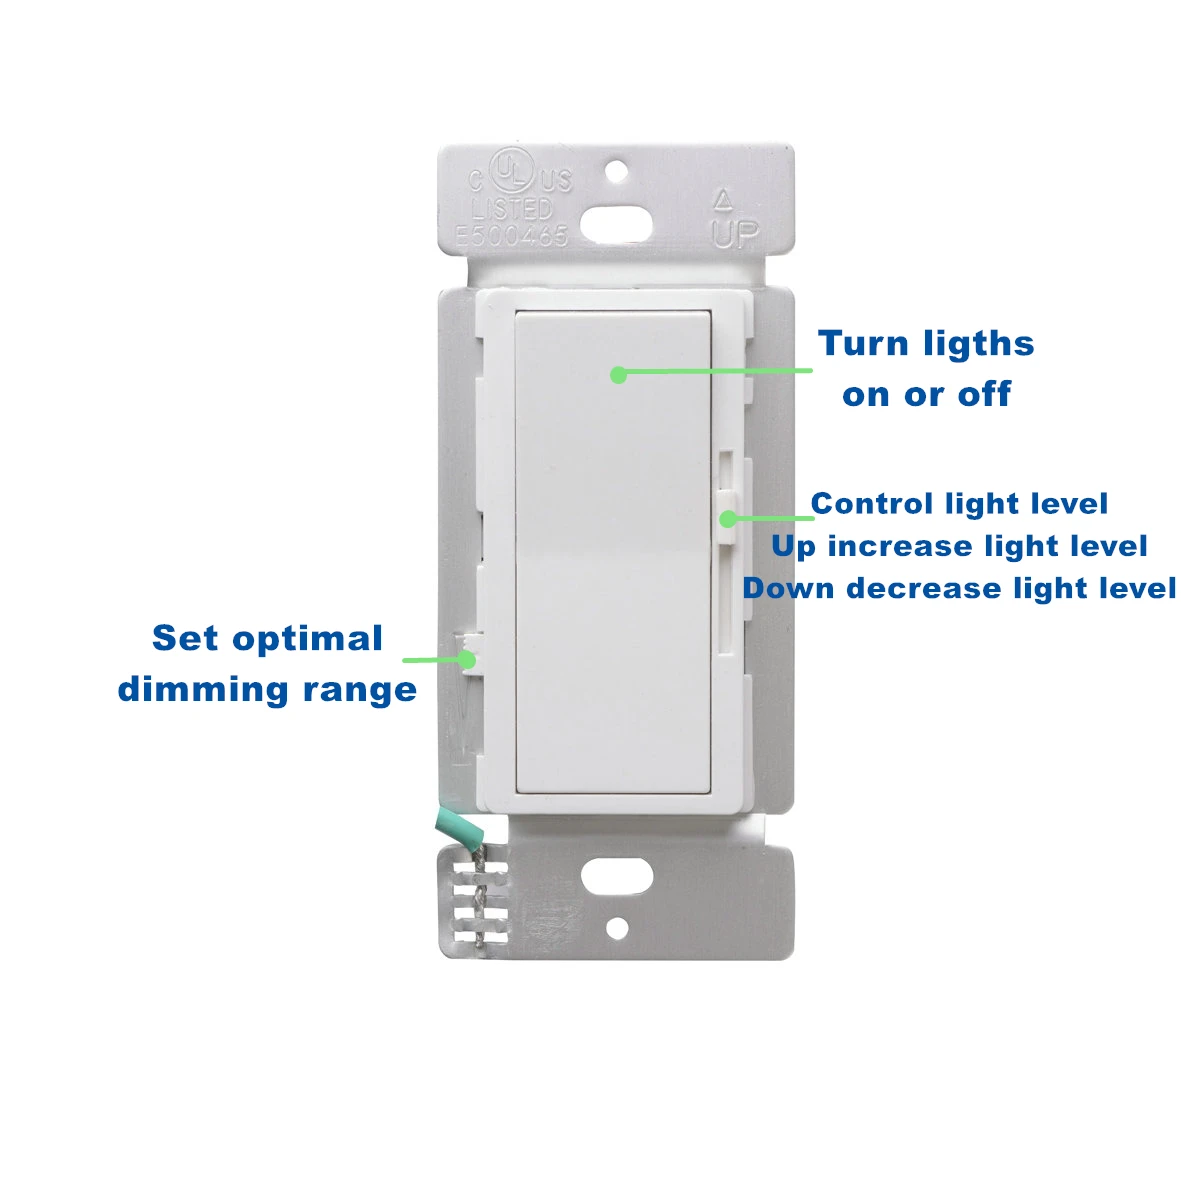 Single pole/3 way dimmable dimmer wall light switch for halogen bulbs,led lamp